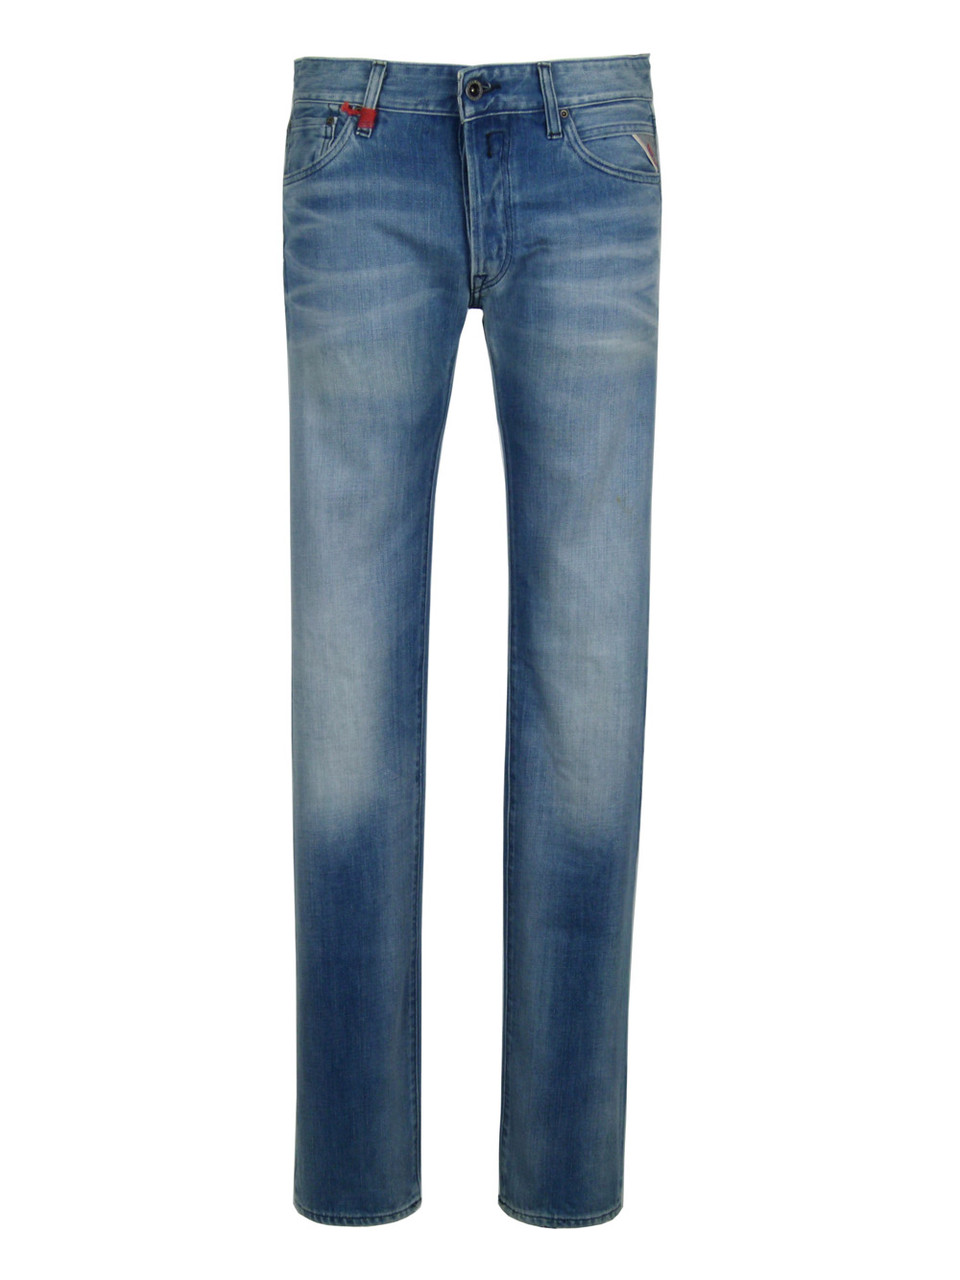 Replay men's faded jeans